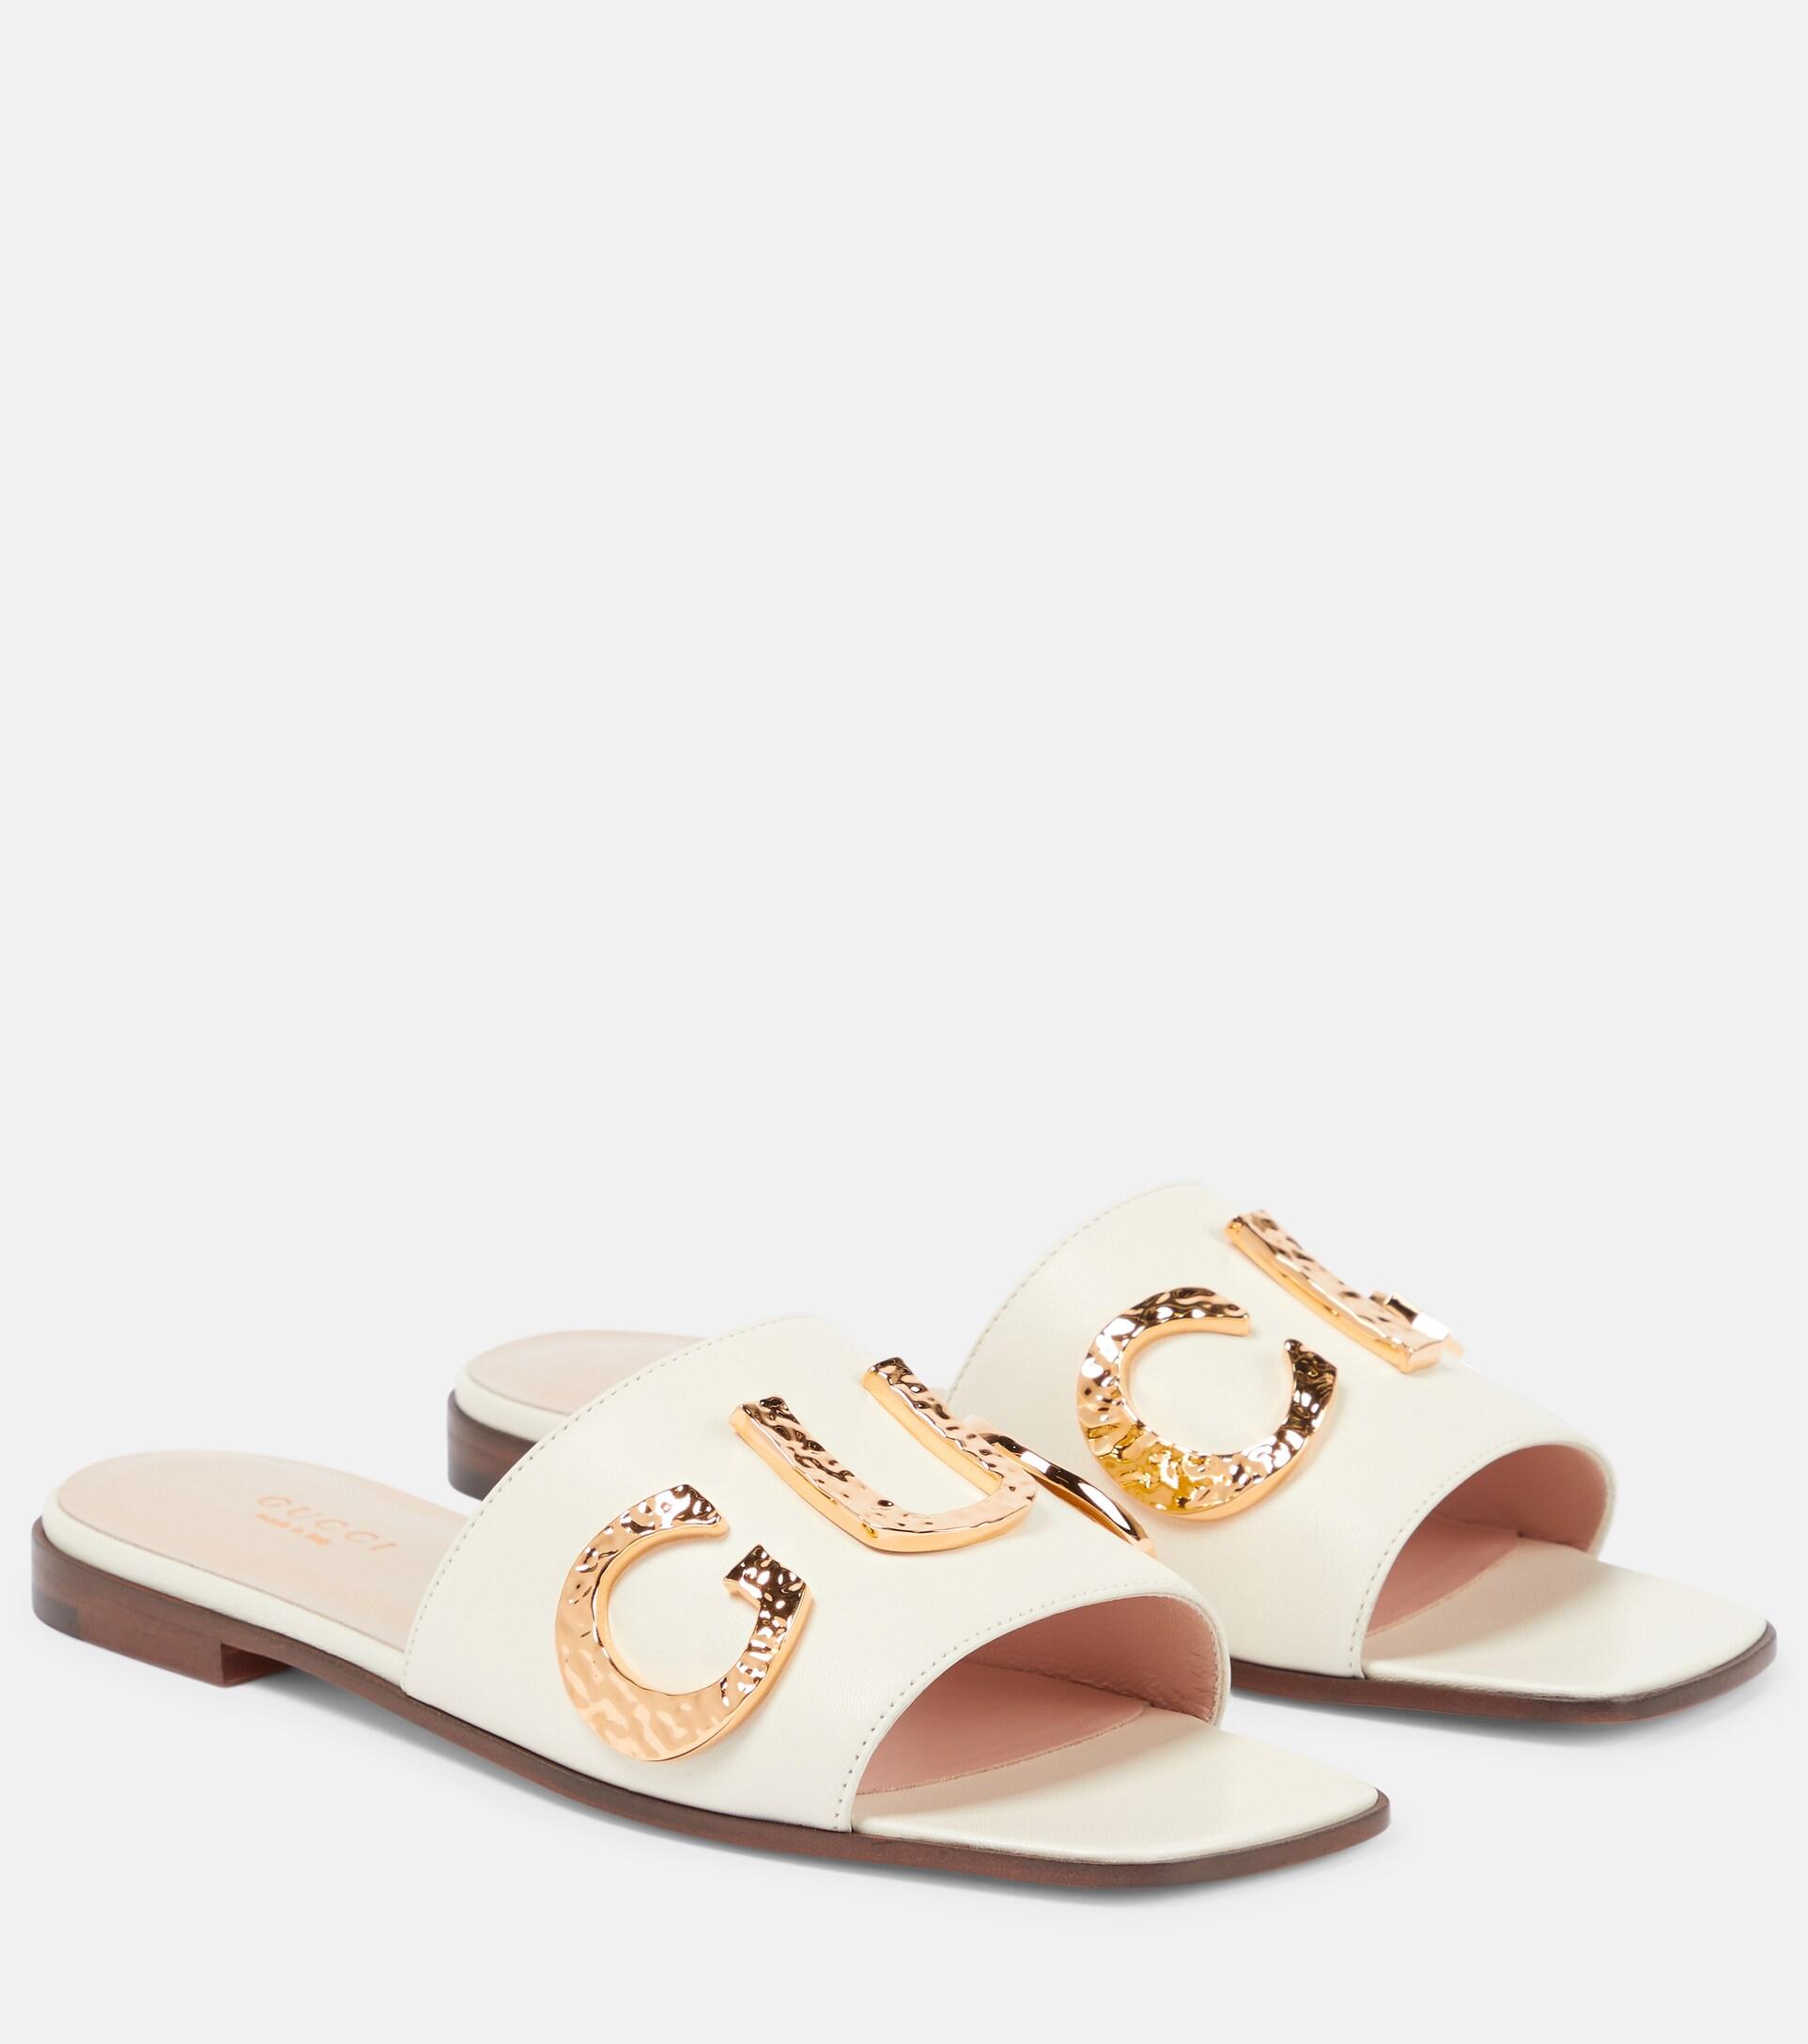 Gucci Leather Flat Sandals in White | Lyst